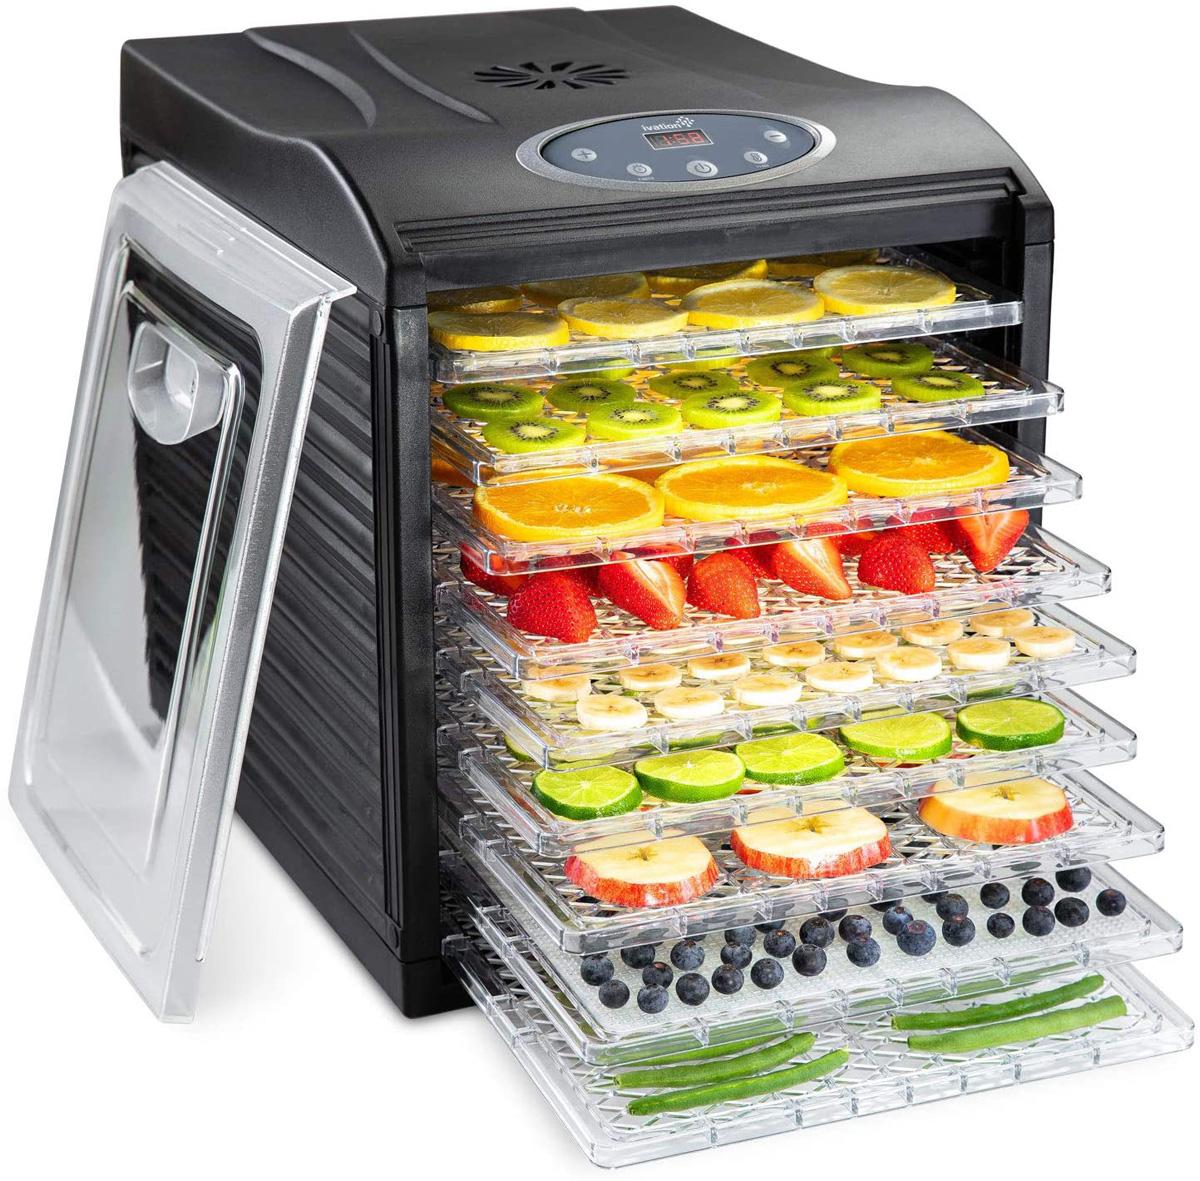 Ivation 9 Tray Countertop Digital Food Dehydrator for $84.99 Shipped